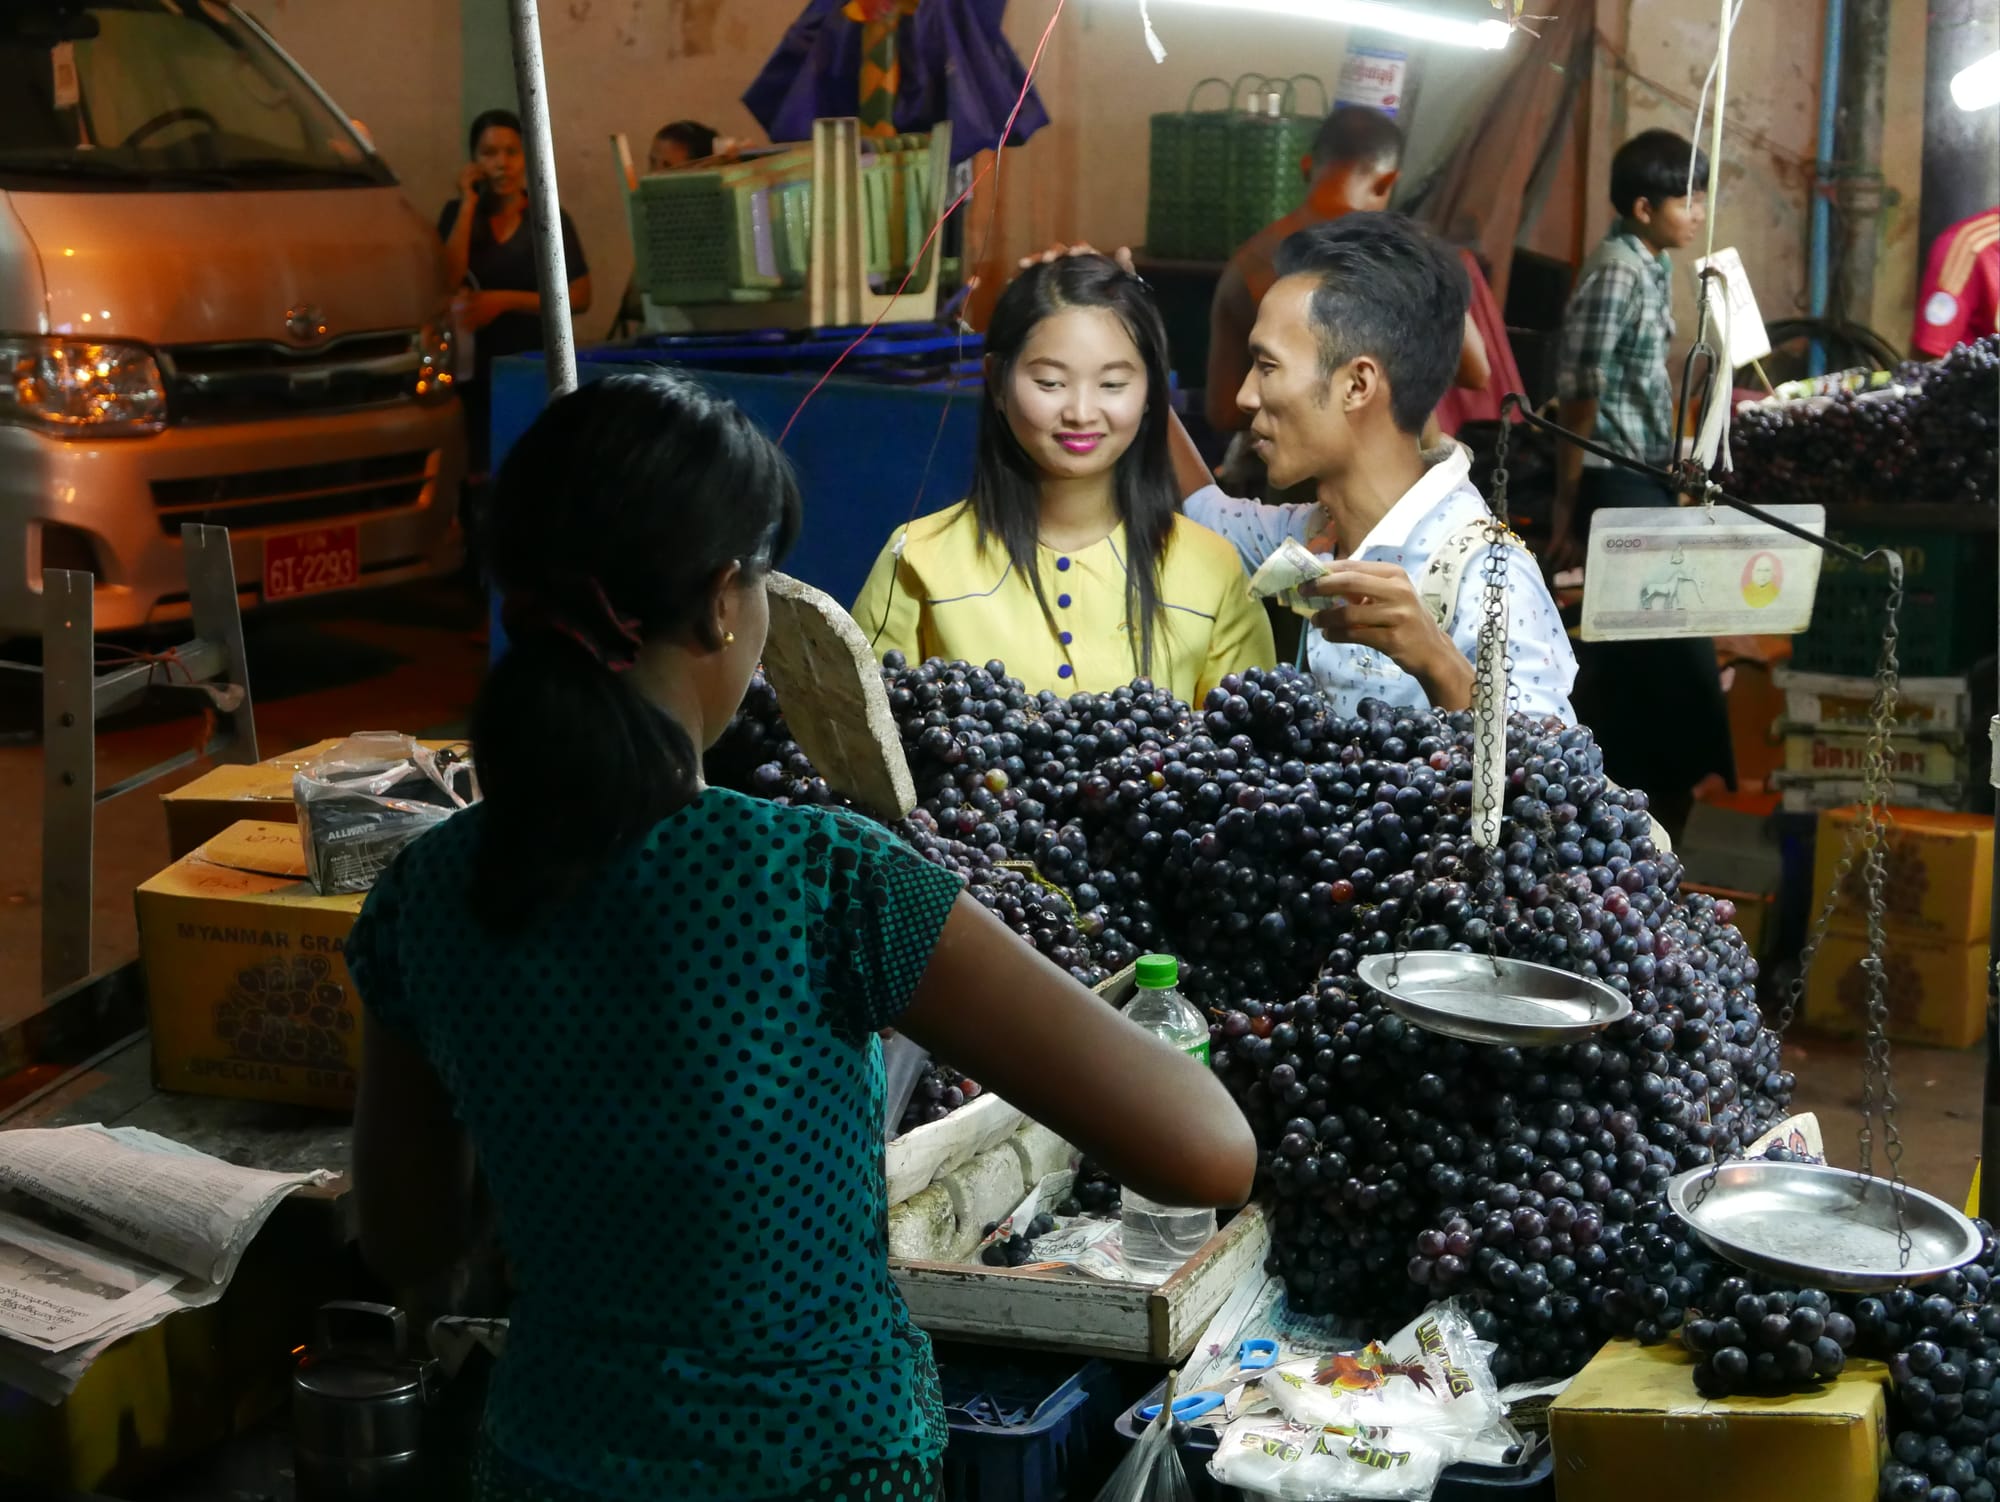 Photo by Author — buying grapes in Mandalay, Myanmar (Burma)